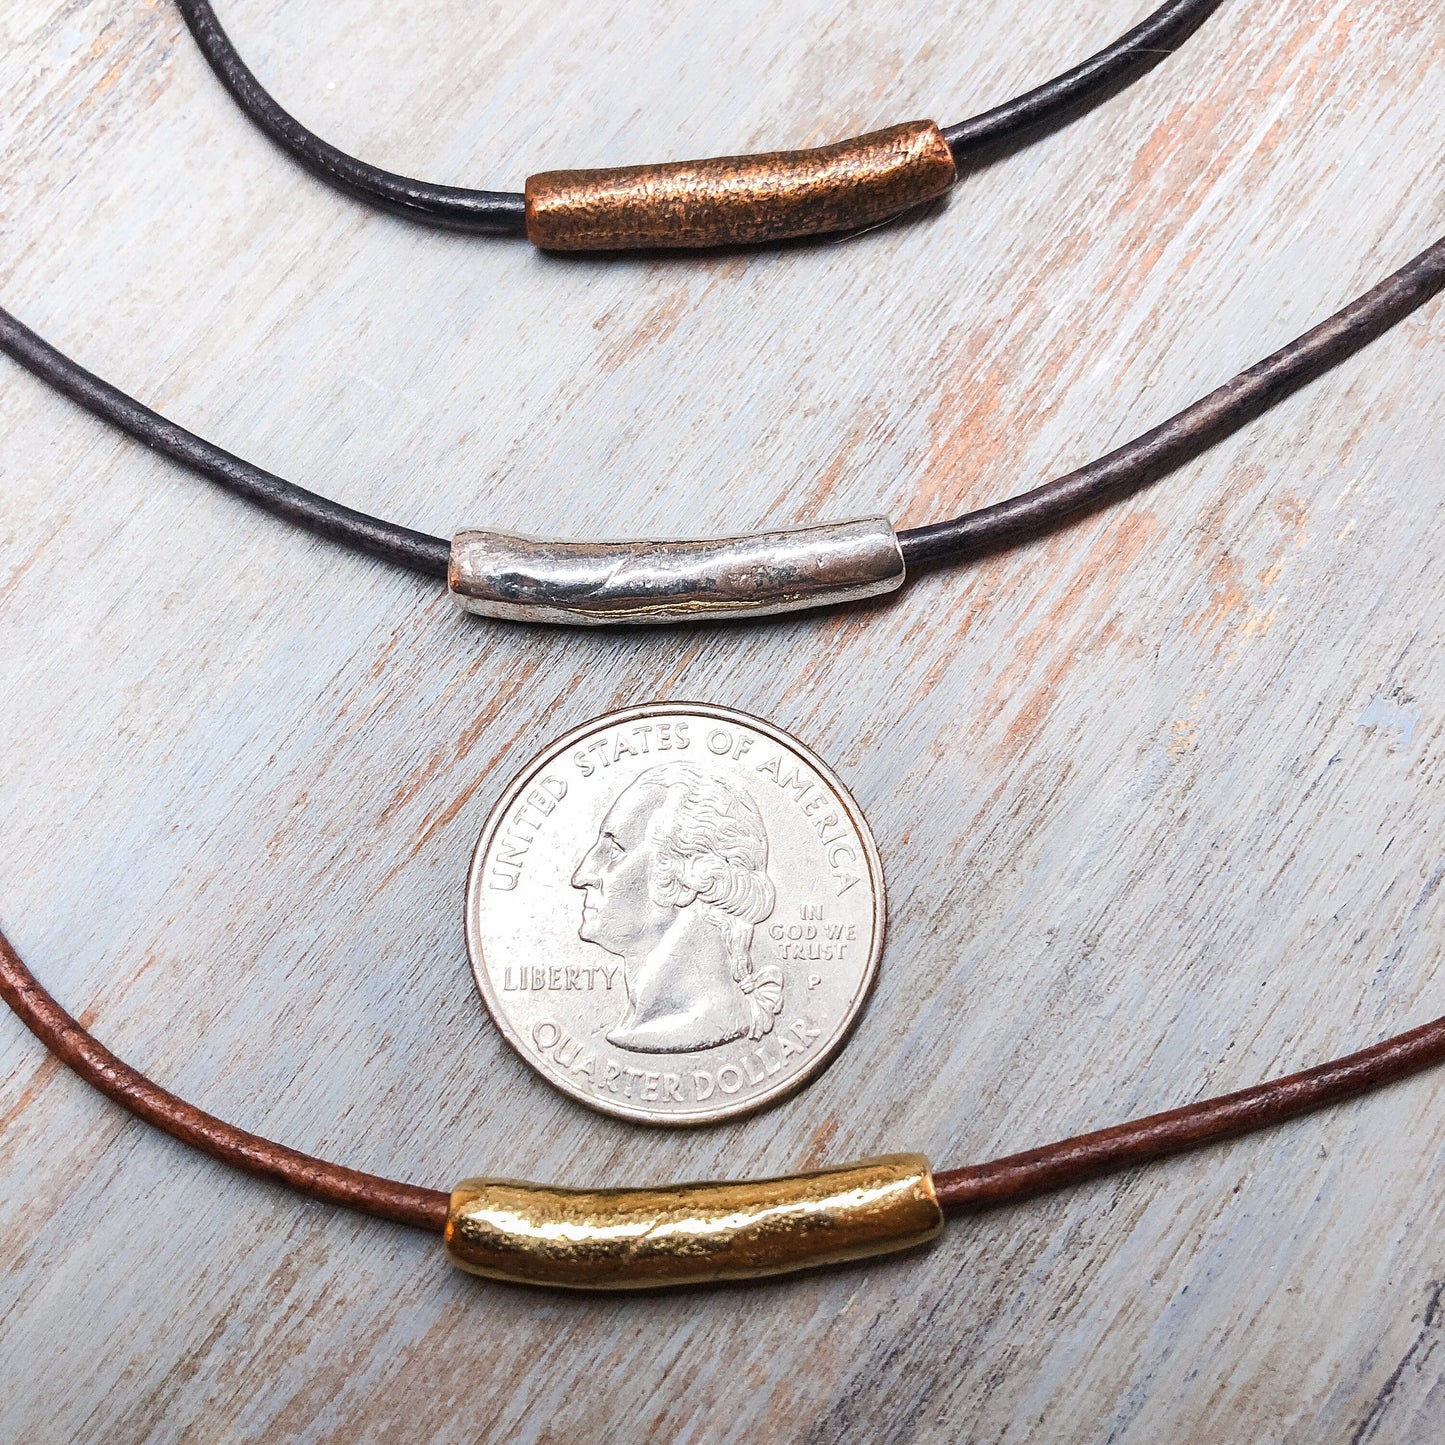 Leather cord necklace for women men | Leather jewelry for him and her | Boho leather necklace | Layering necklace